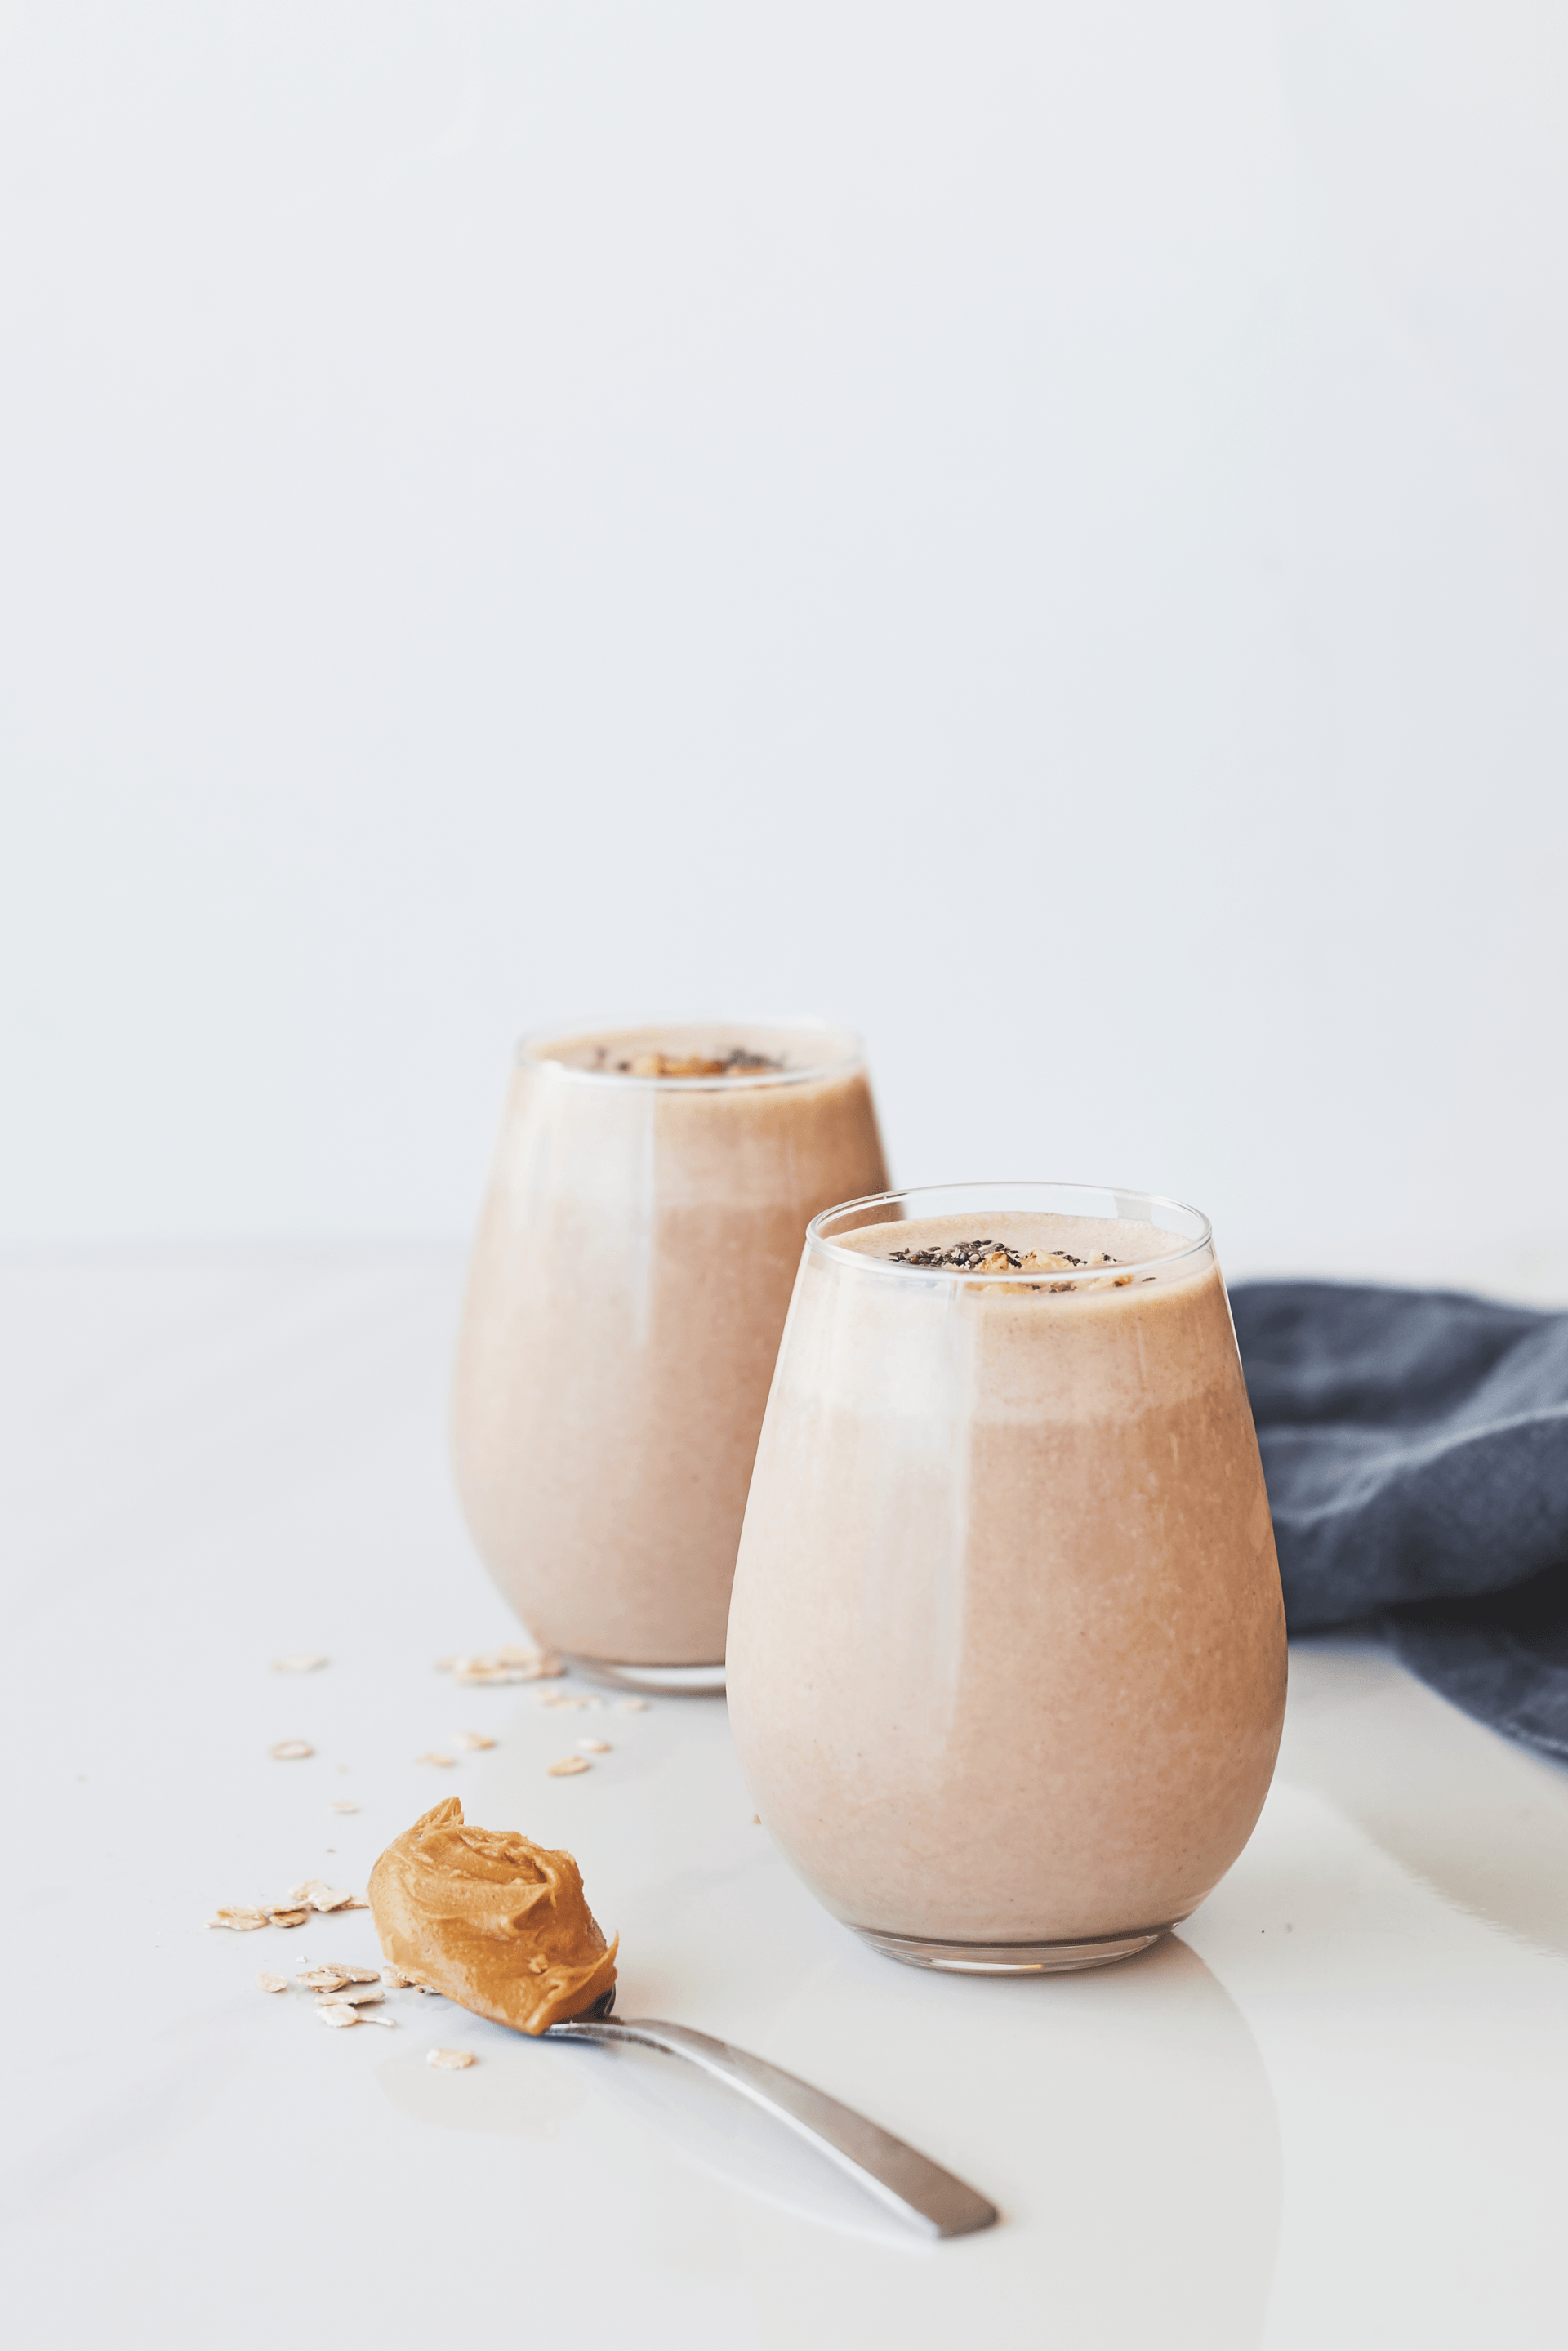 Peanut Butter Banana and chocolate smoothie